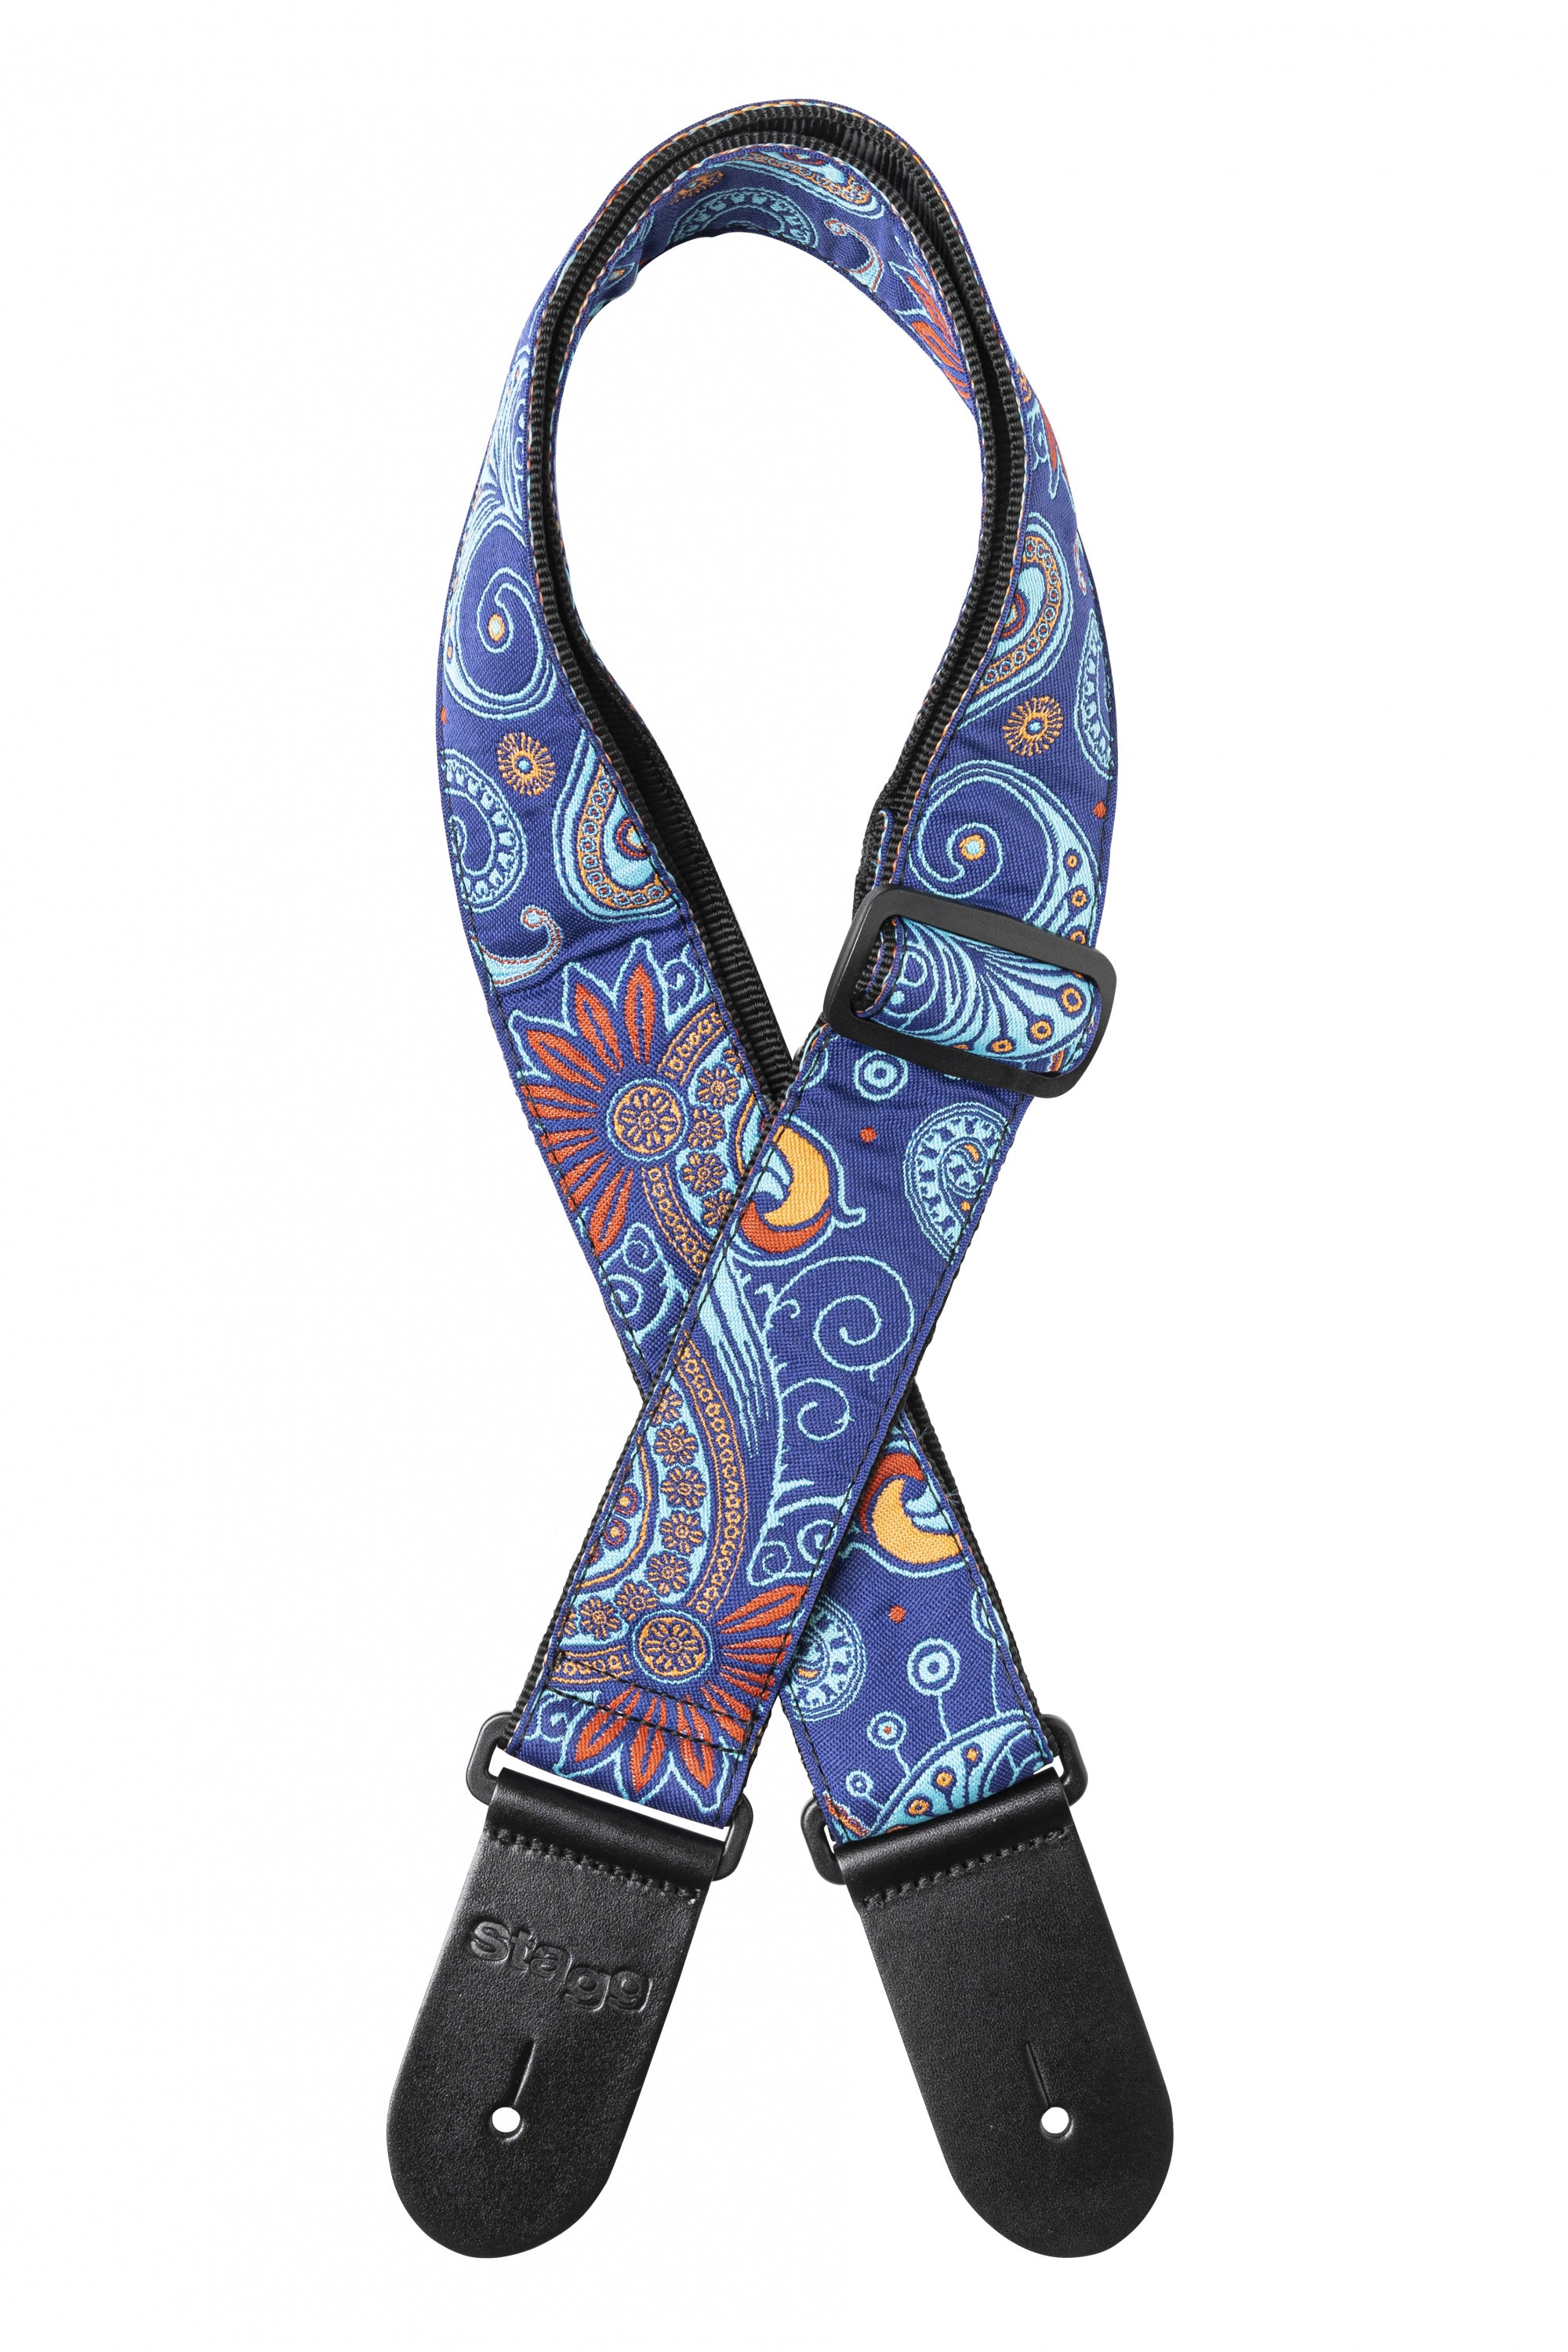 Stagg Woven Guitar Strap Paisley Pattern 2 Blue 1